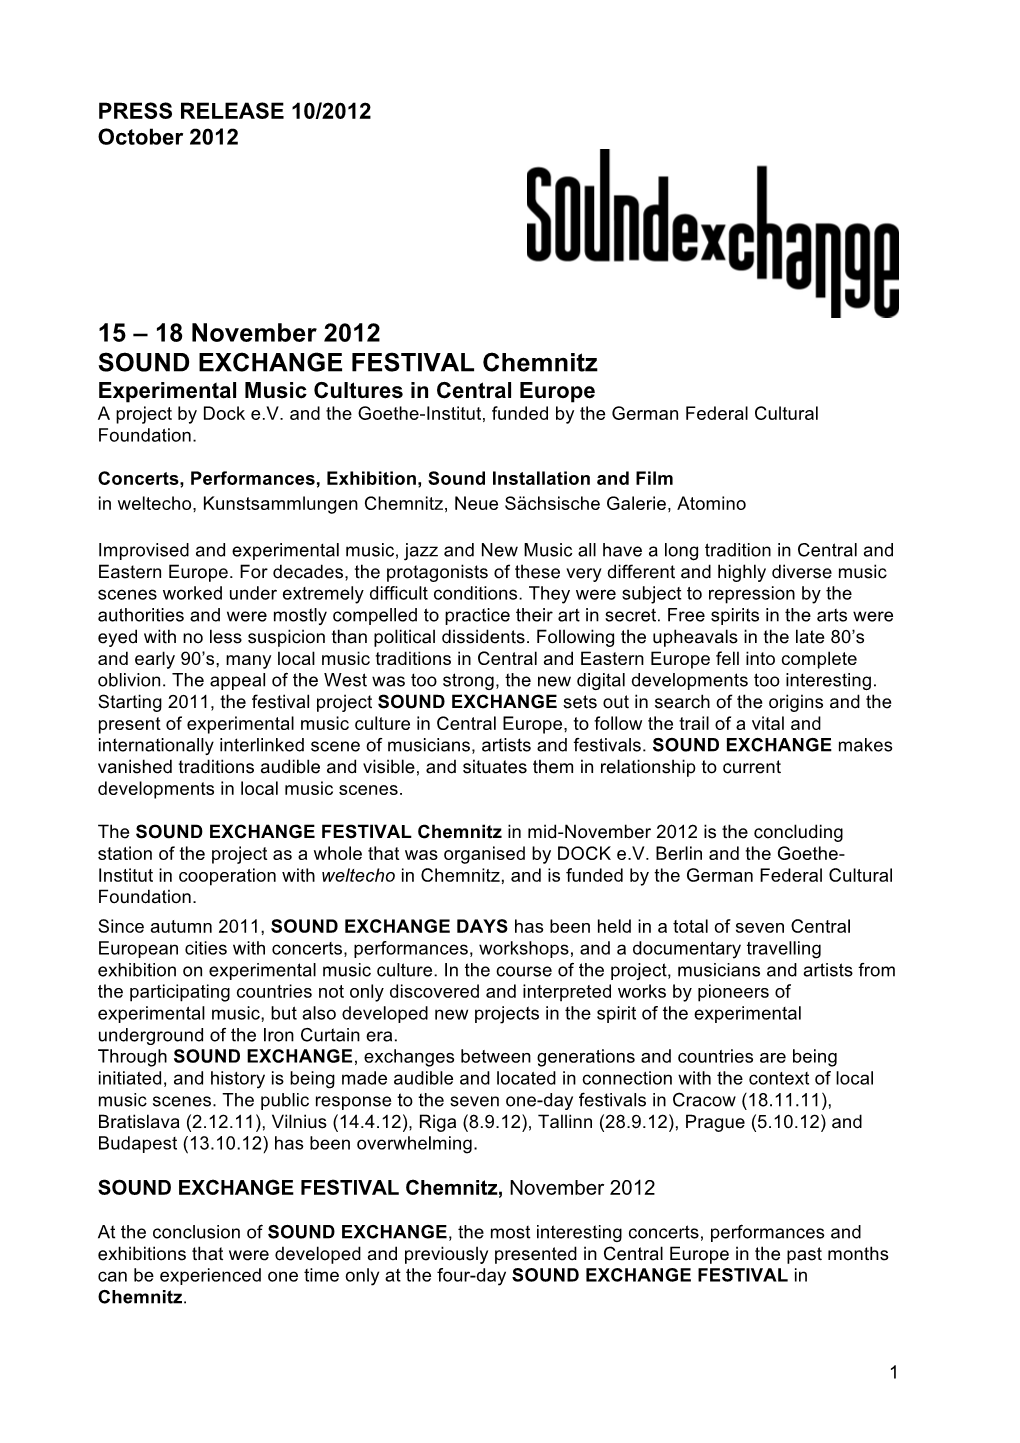 15 – 18 November 2012 SOUND EXCHANGE FESTIVAL Chemnitz Experimental Music Cultures in Central Europe a Project by Dock E.V